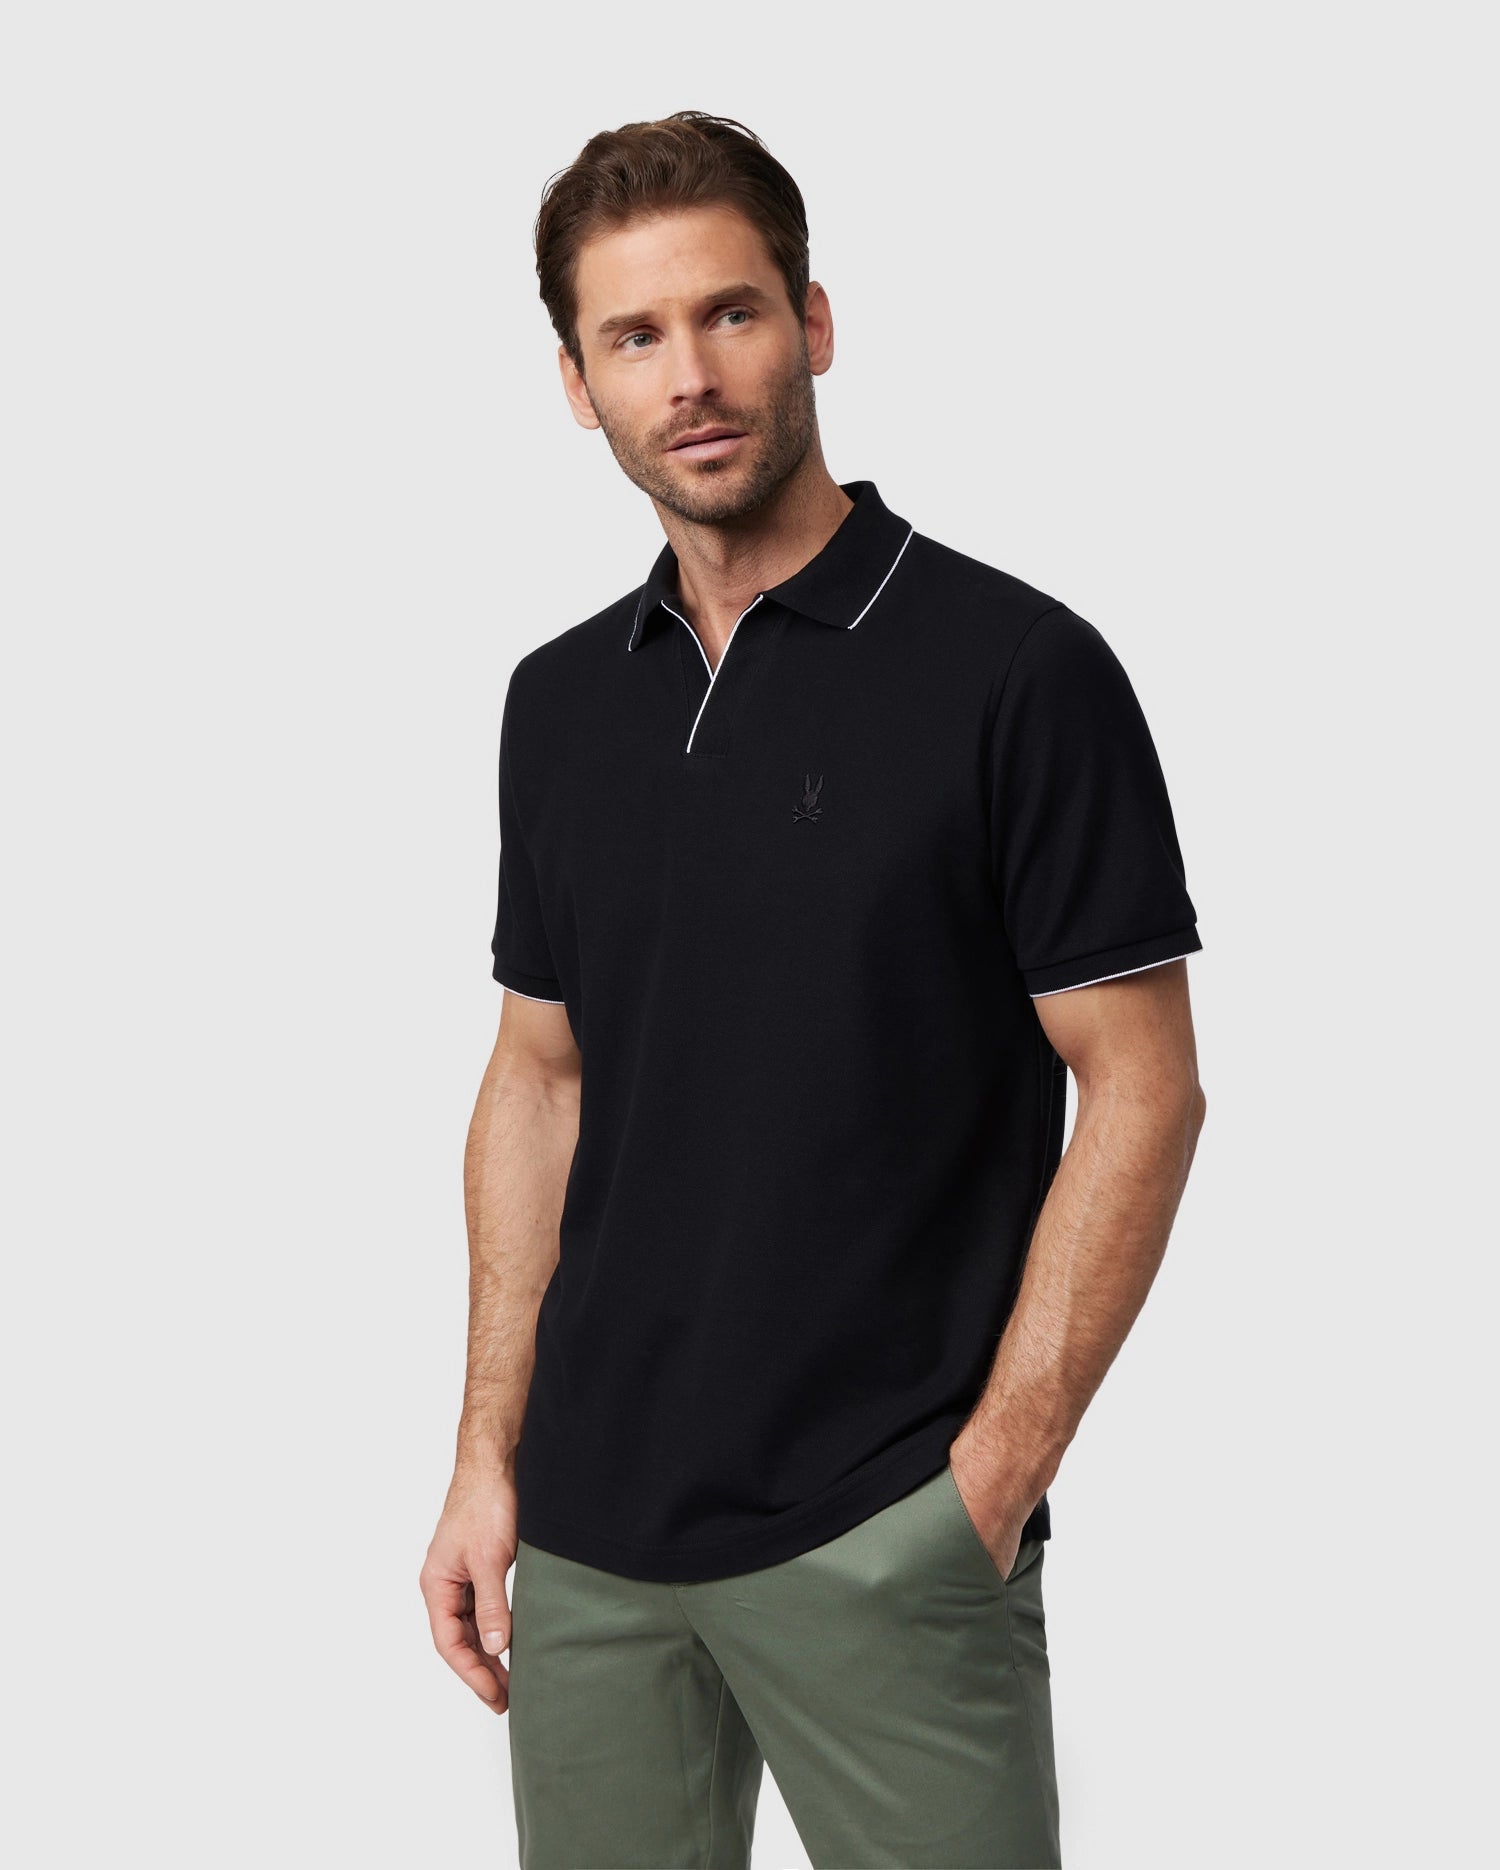 A man with short brown hair and a beard is wearing a black Psycho Bunny MENS EAST HILLS JOHNNY COLLAR POLO SHIRT - B6K331B200 with white trim on the Johnny collar and sleeves. He has one hand in the pocket of his light olive-green pants and looks to the side with a neutral expression. The background is plain gray.